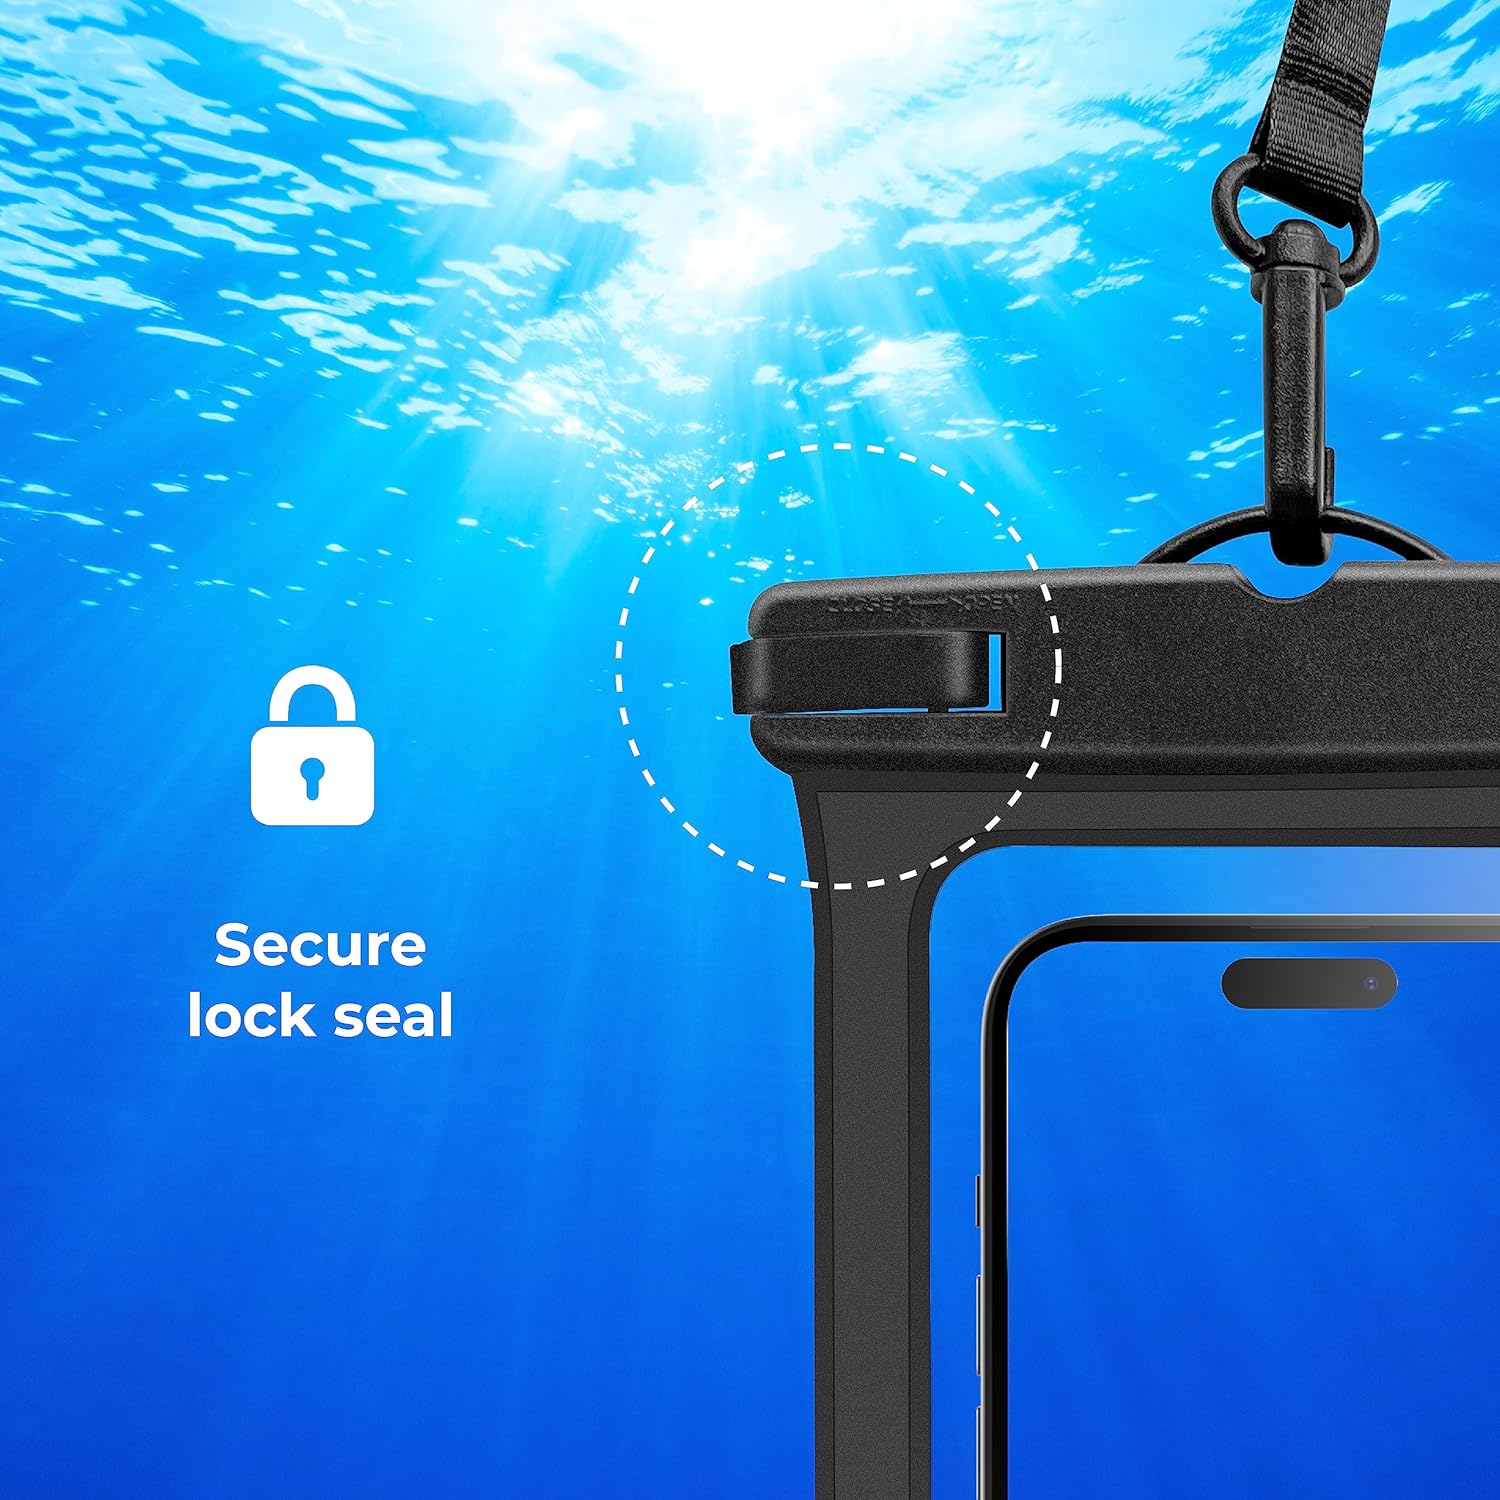 Blupebble Splash Waterproof Phone Case, IPX8 Certified 30M Waterproof Phone Pouch Waterproof Cell Phone Case Fit for Big Phones up to 7.2'' Compatible with iPhone 12/13/14 Pro Max S22 S23 Ultra